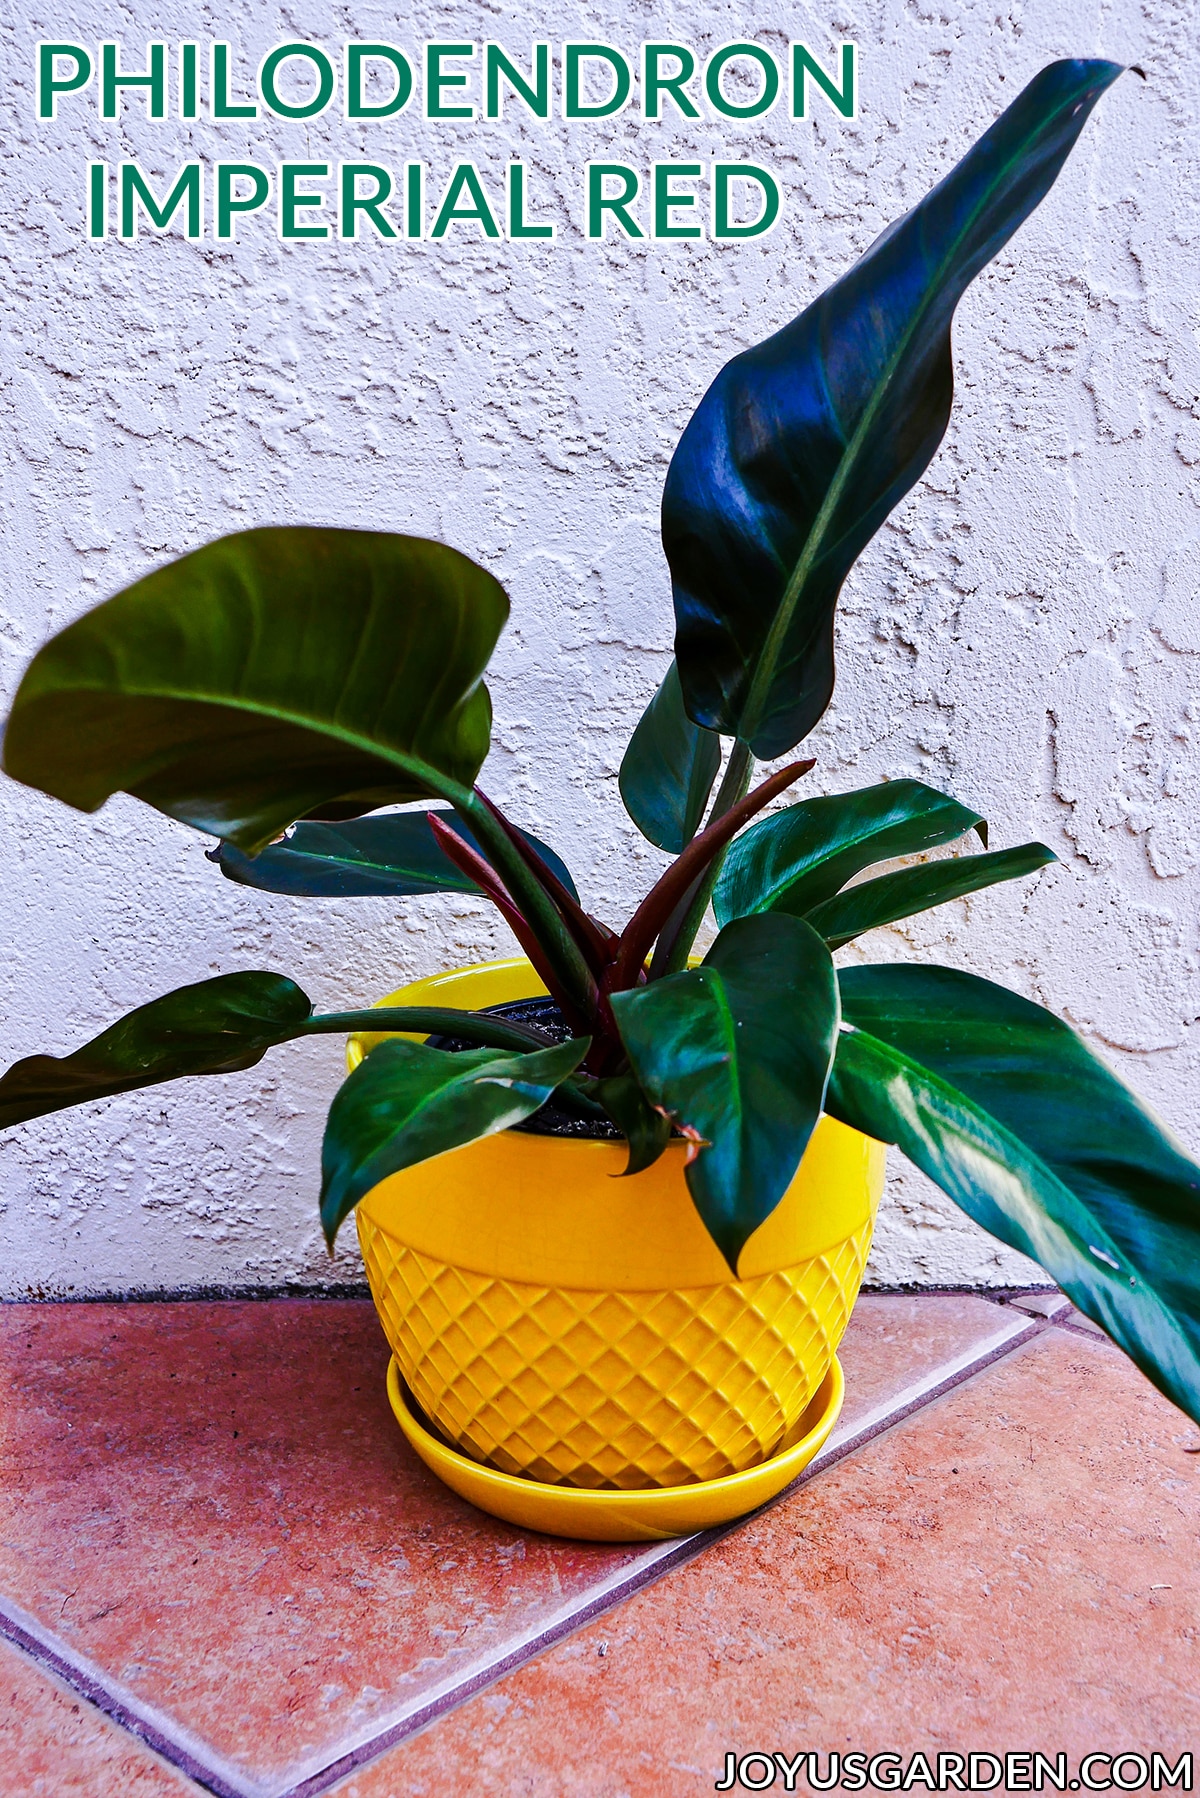 a philodendron imperial red houseplant in a yellow pot sits on the ground the text reads philodendron imperial red